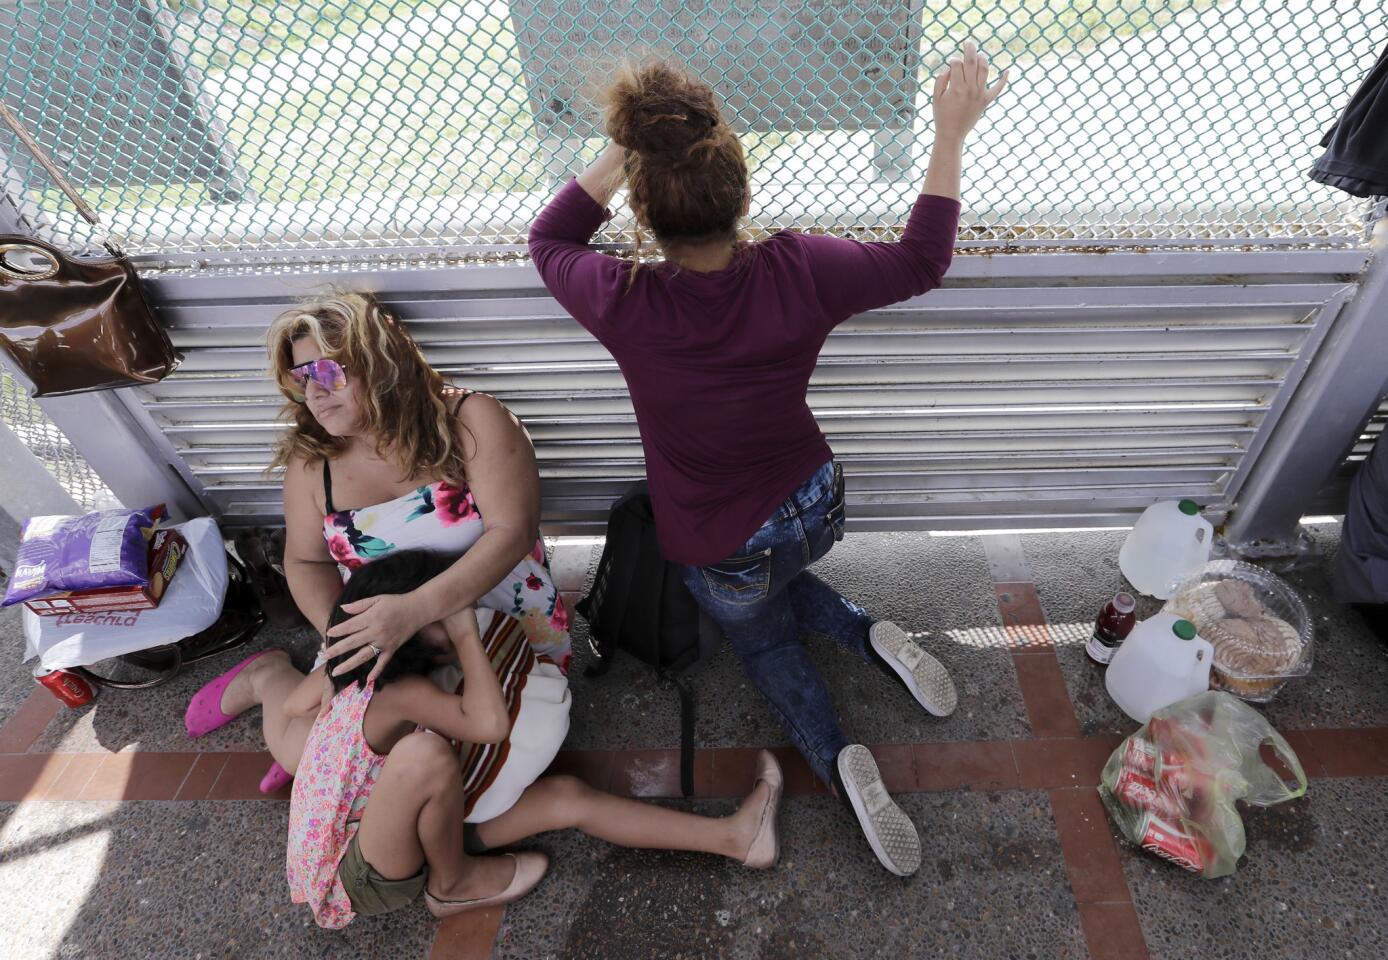 Immigrants from Honduras seeking asylum wait on the Gateway International Bridge, which connects the United States and Mexico, in Matamoros, Mexico, on June 24, 2018. The family has been waiting two days on the bridge.